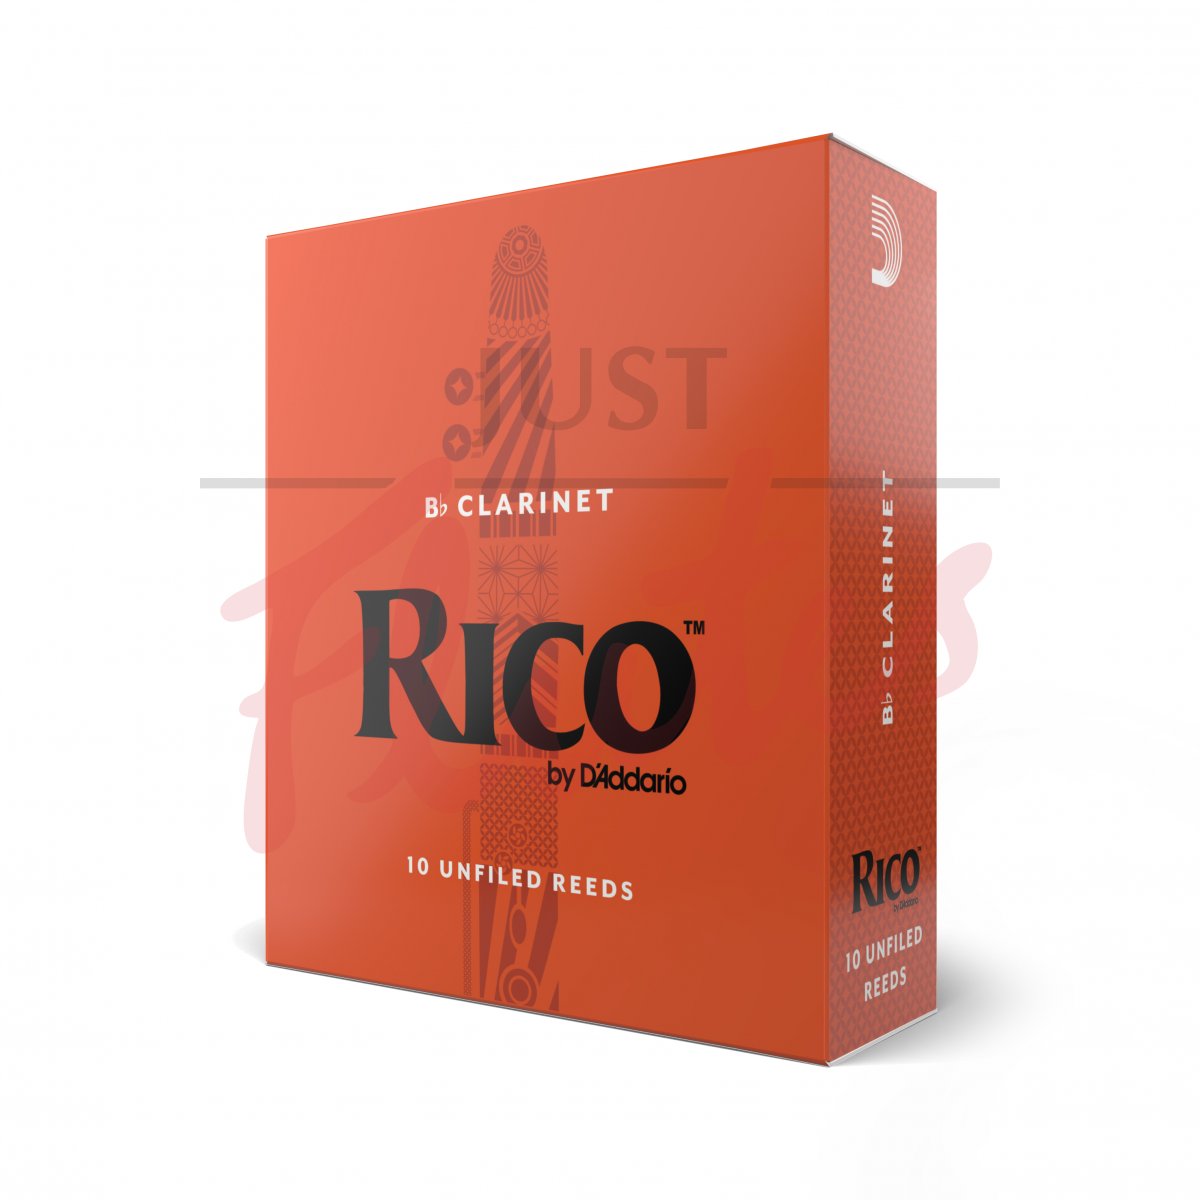 Rico by D'Addario RCA1015 Clarinet Reeds, 10-pack - Strength 1.5